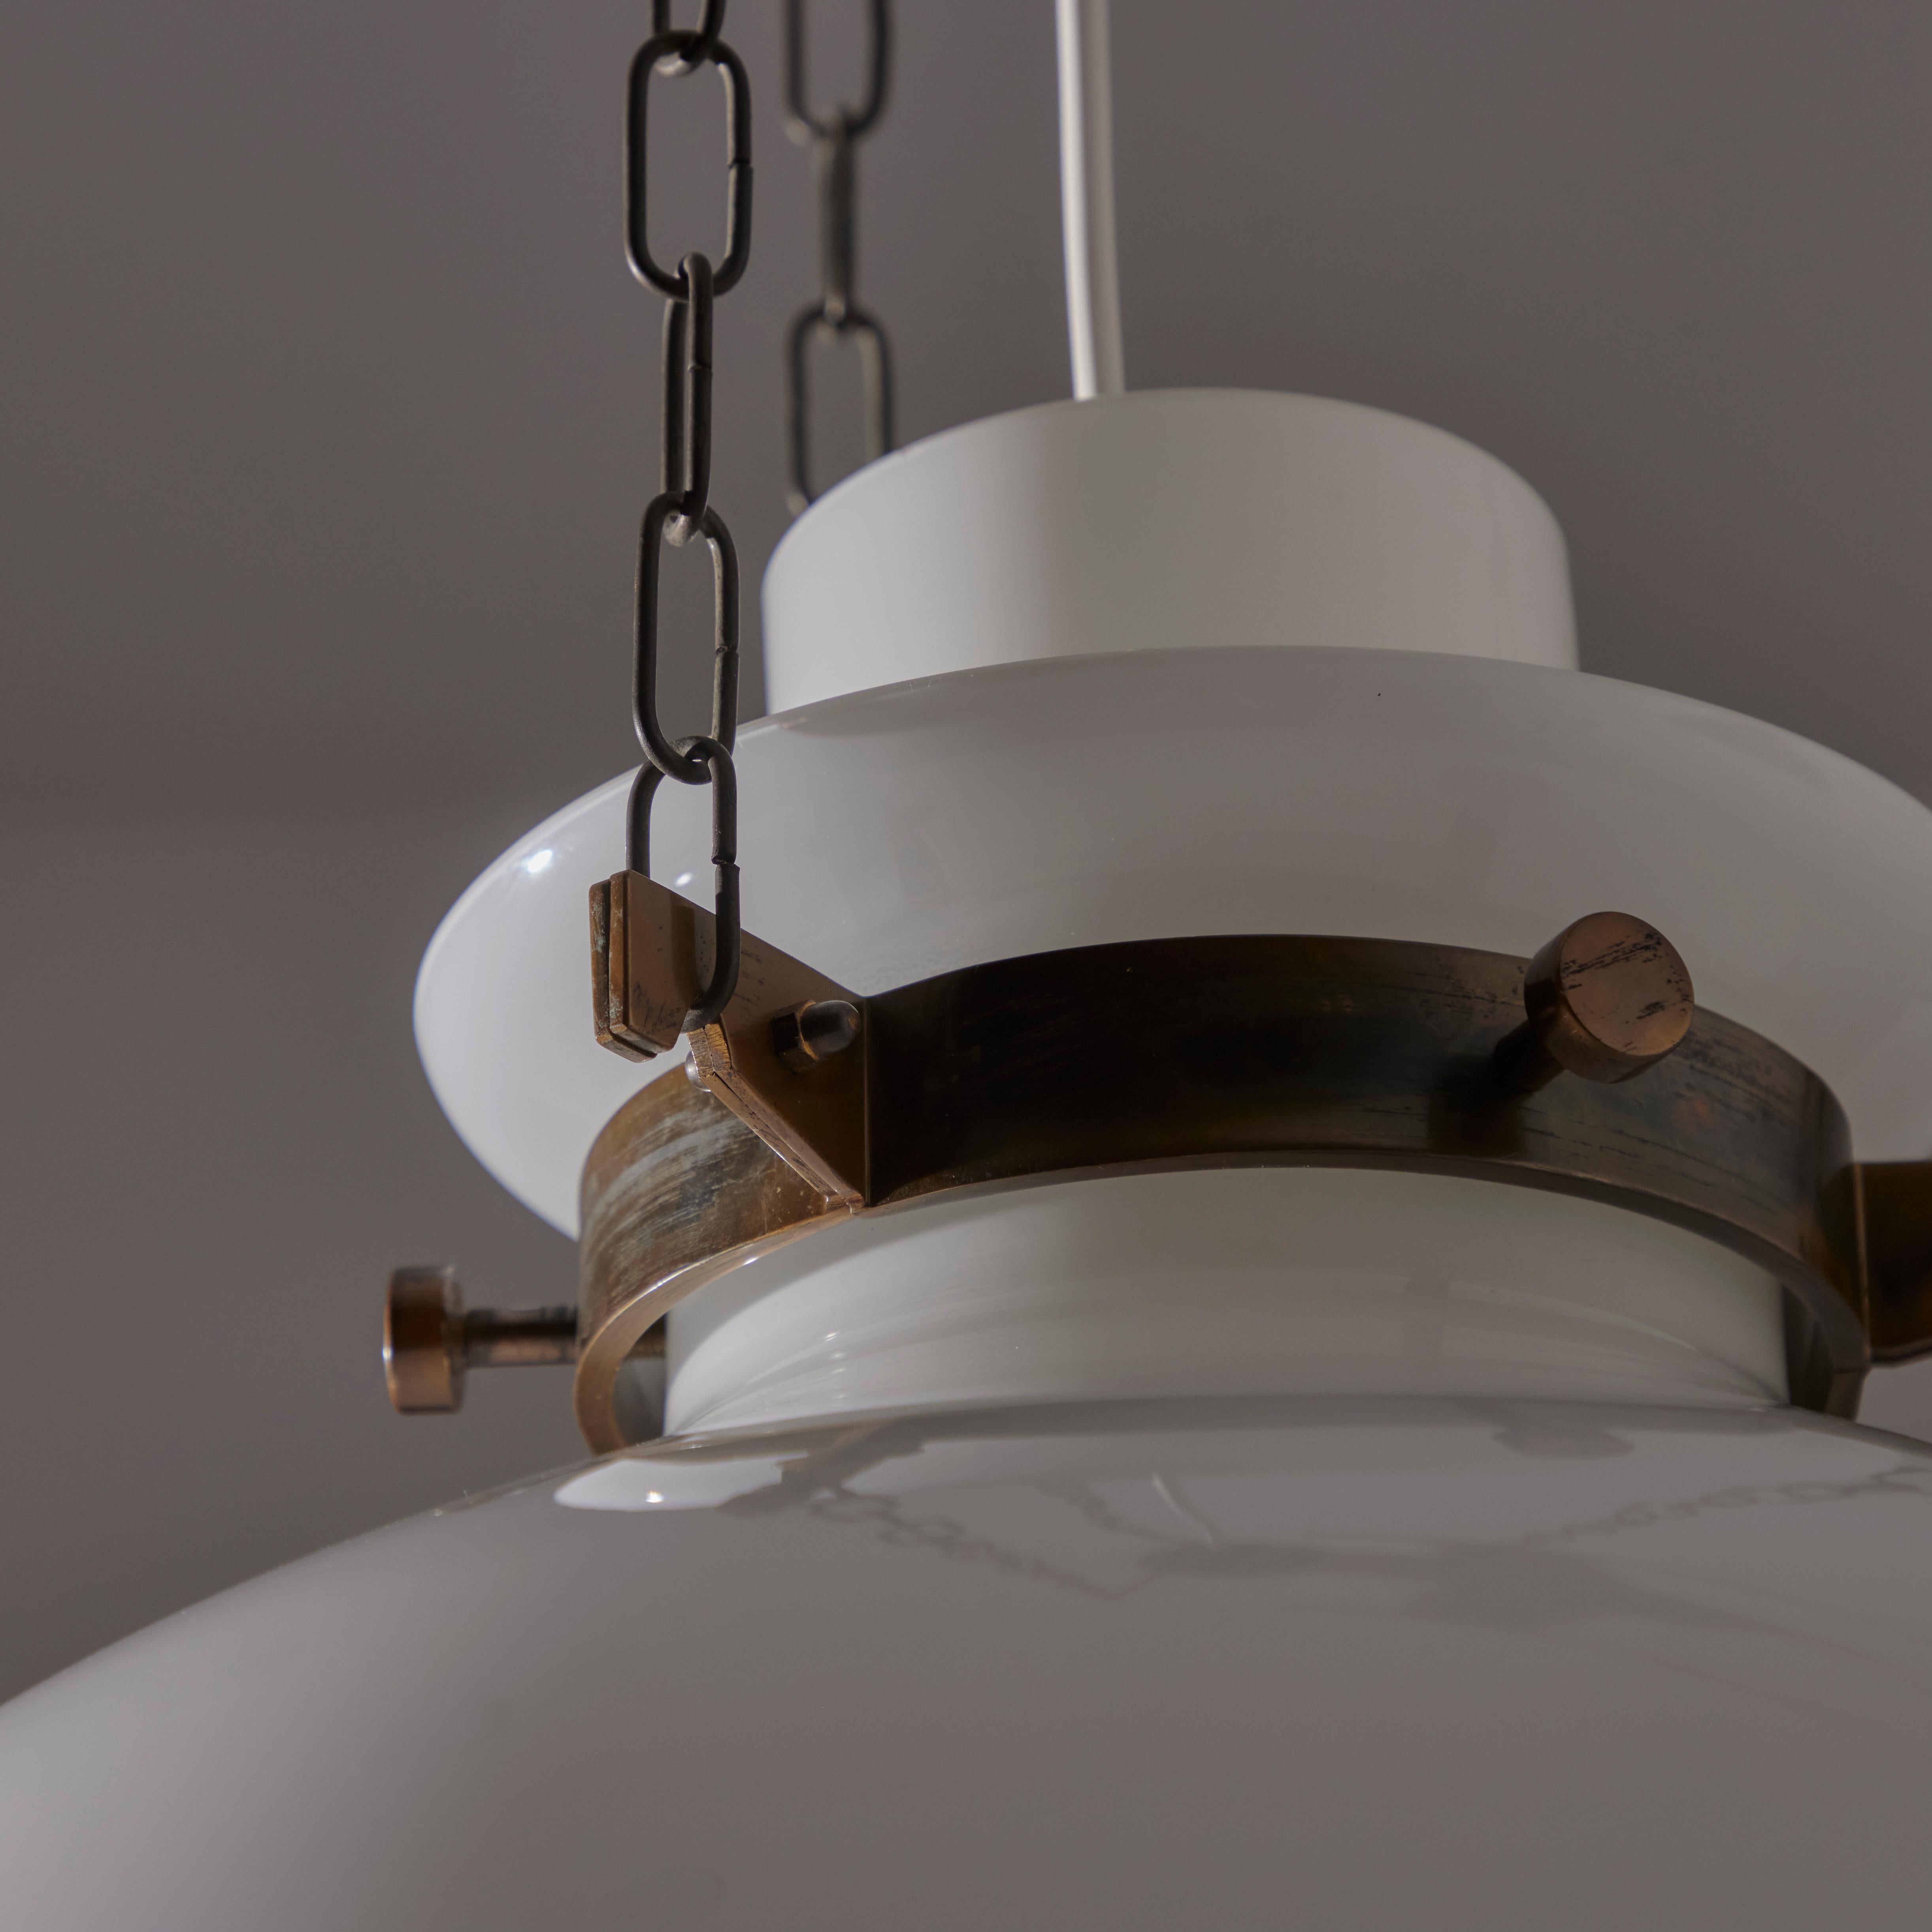 Mid-20th Century Ceiling Light by Paolo Caliari for Venini For Sale